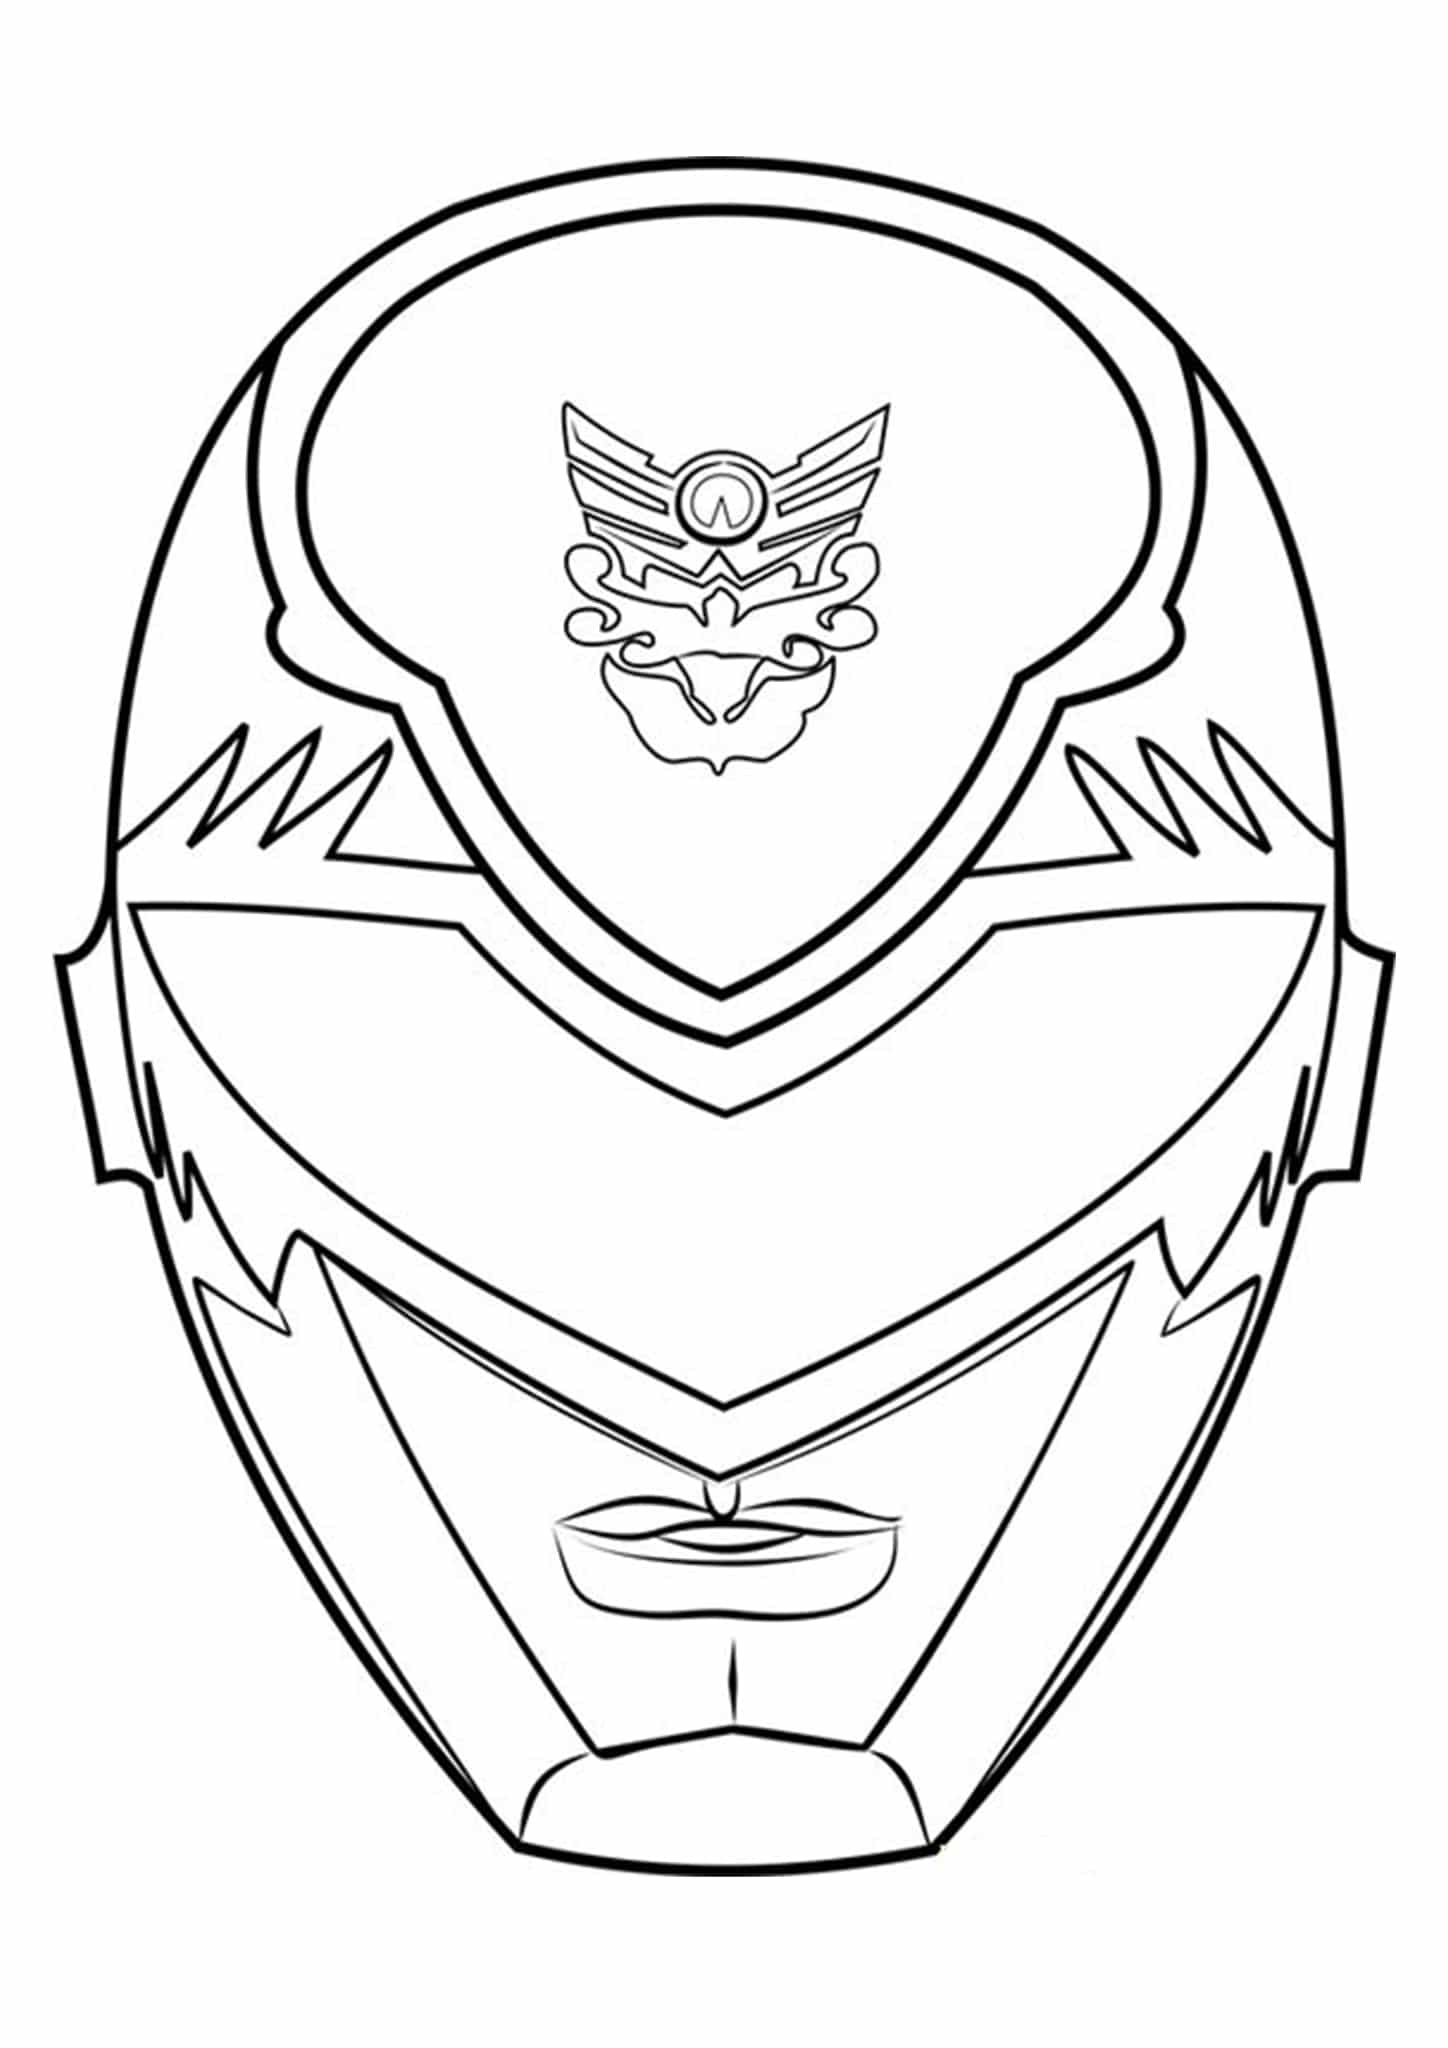 Power Ranger Mask Coloring Page - Free Power Rangers Coloring ...